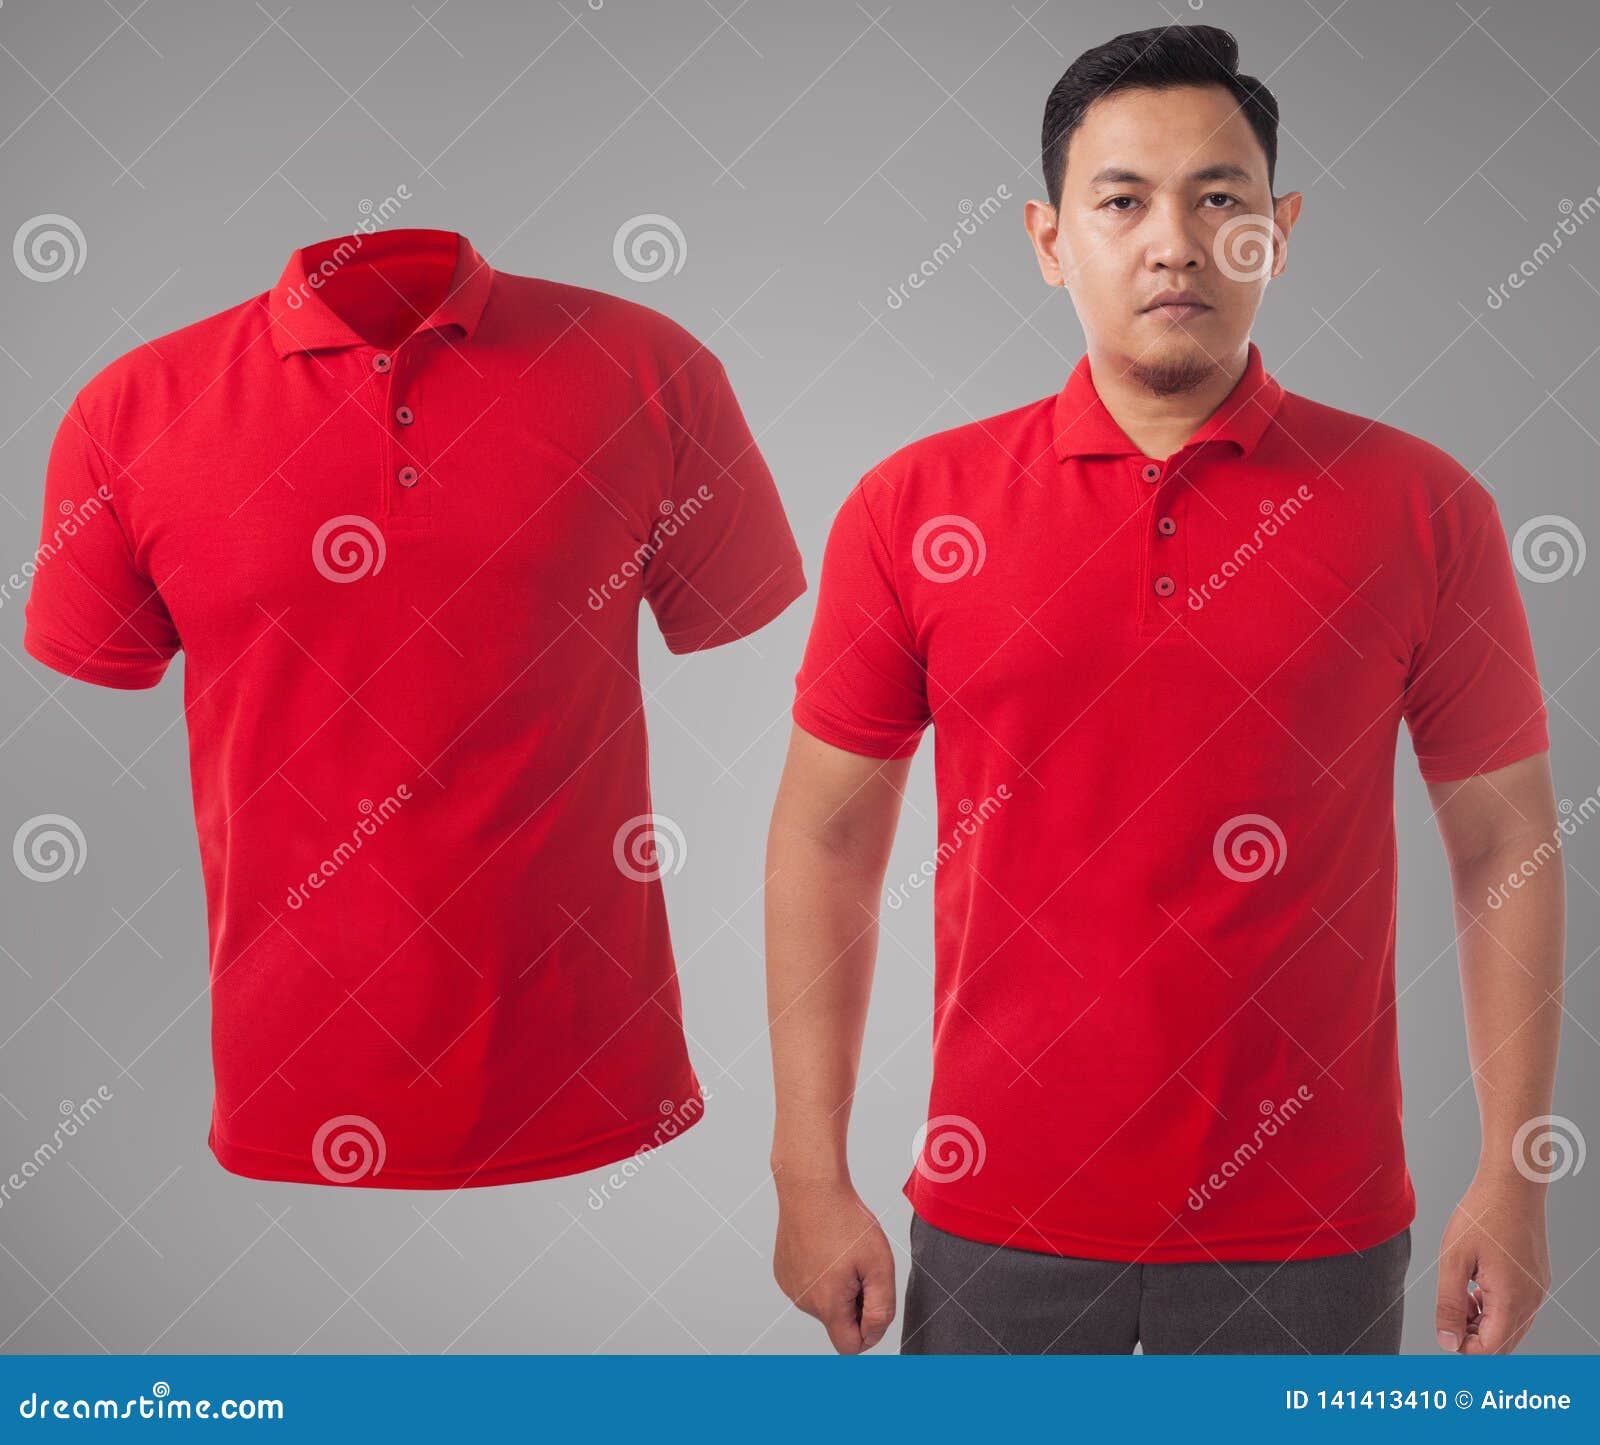 Red Collared Shirt Design Template Stock Photo - Image of isolated ...